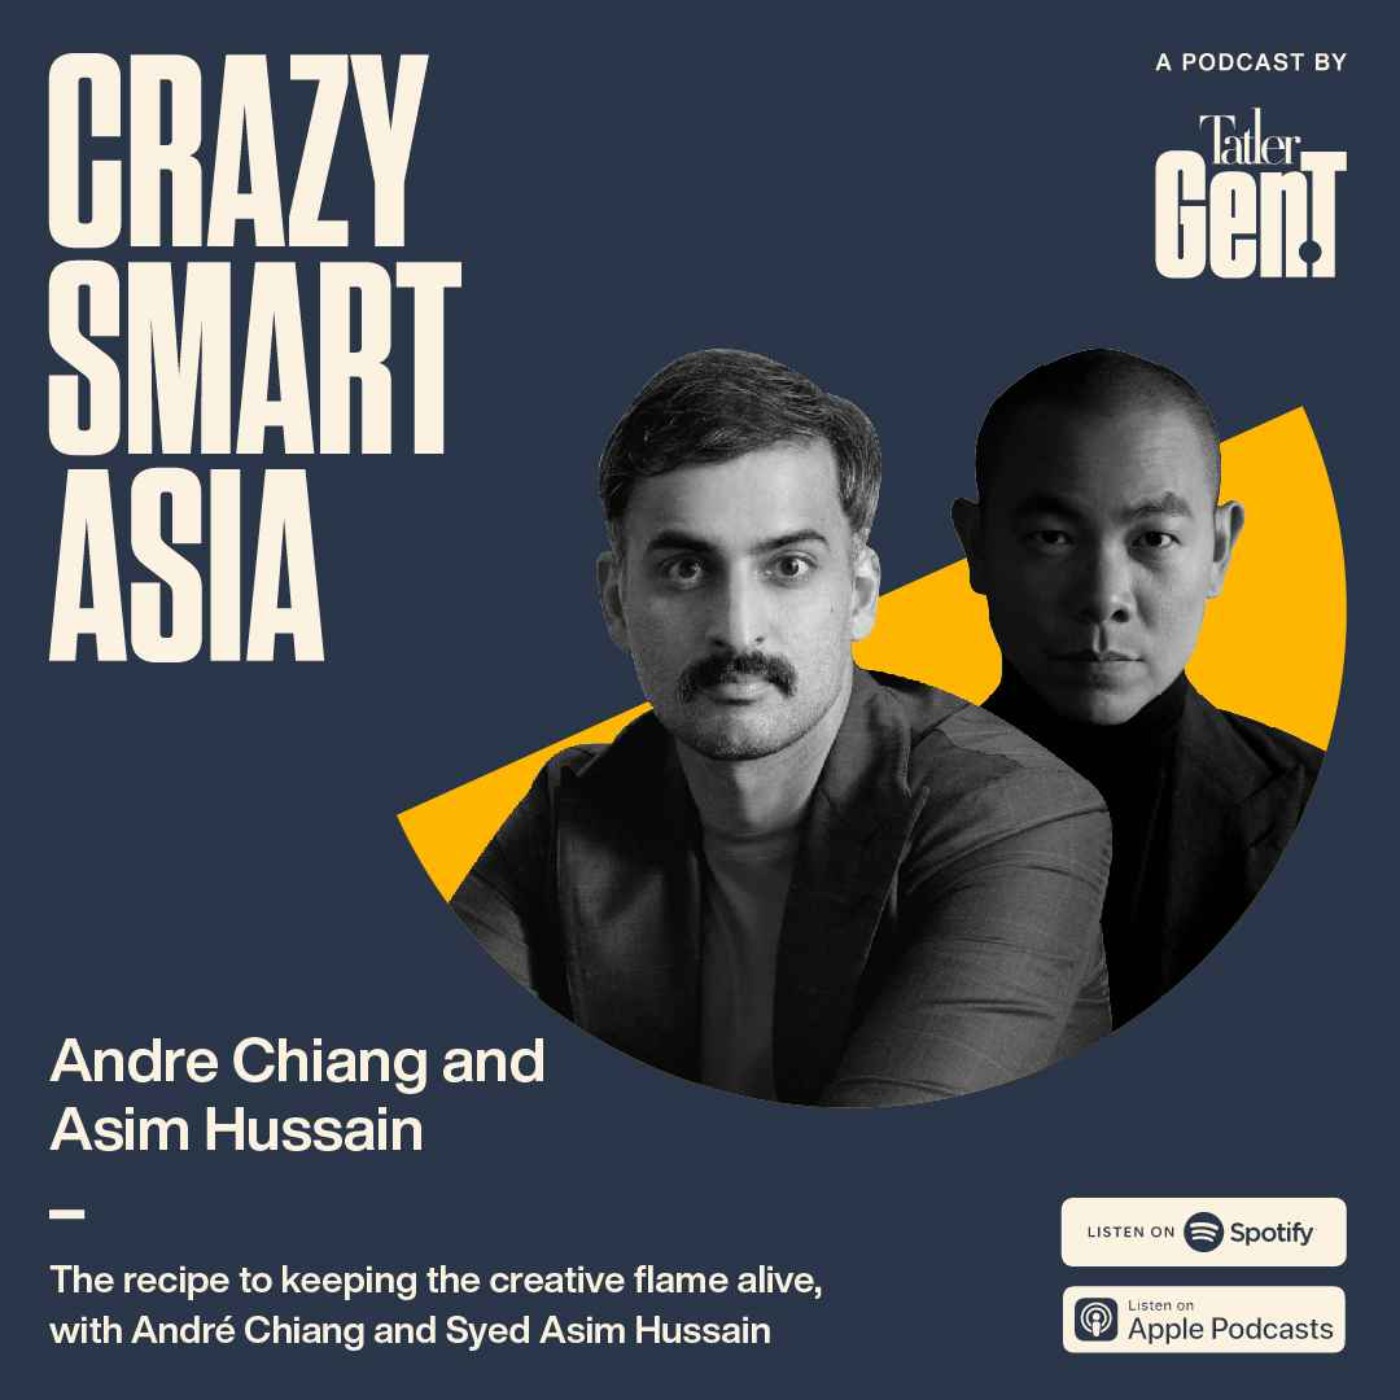 The recipe to keeping the creative flame alive, with André Chiang and Syed Asim Hussain